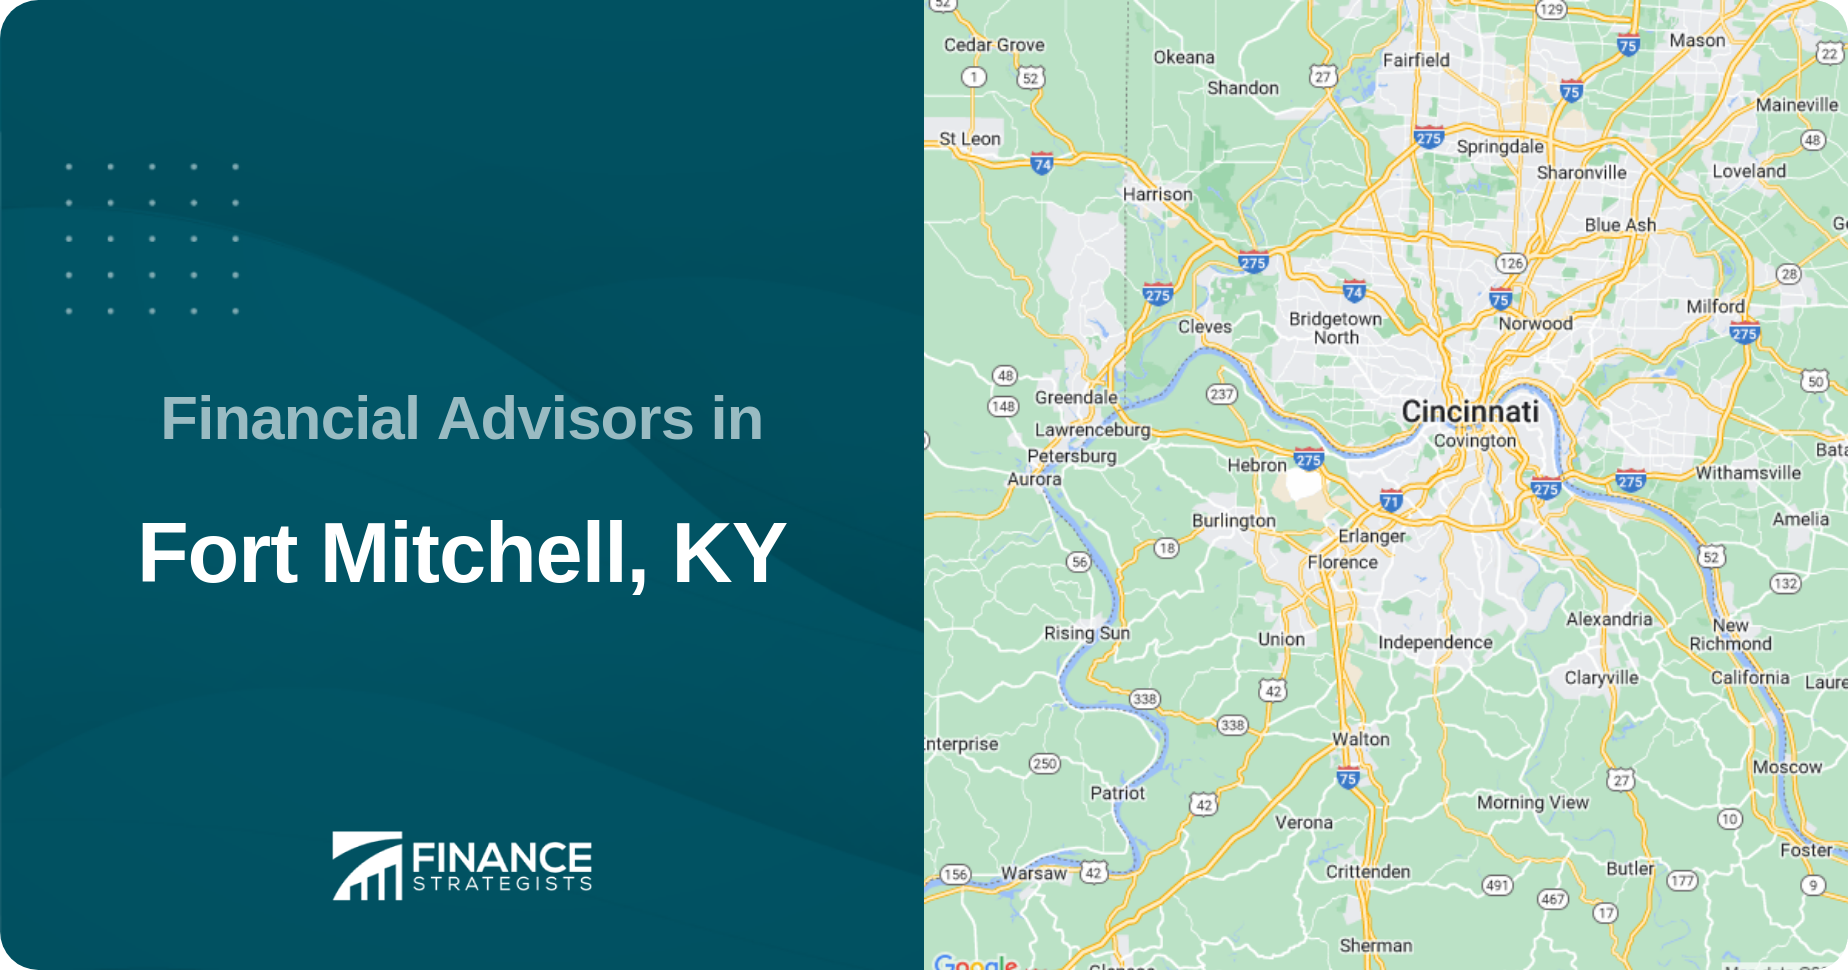 Financial Advisors in Fort Mitchell, KY